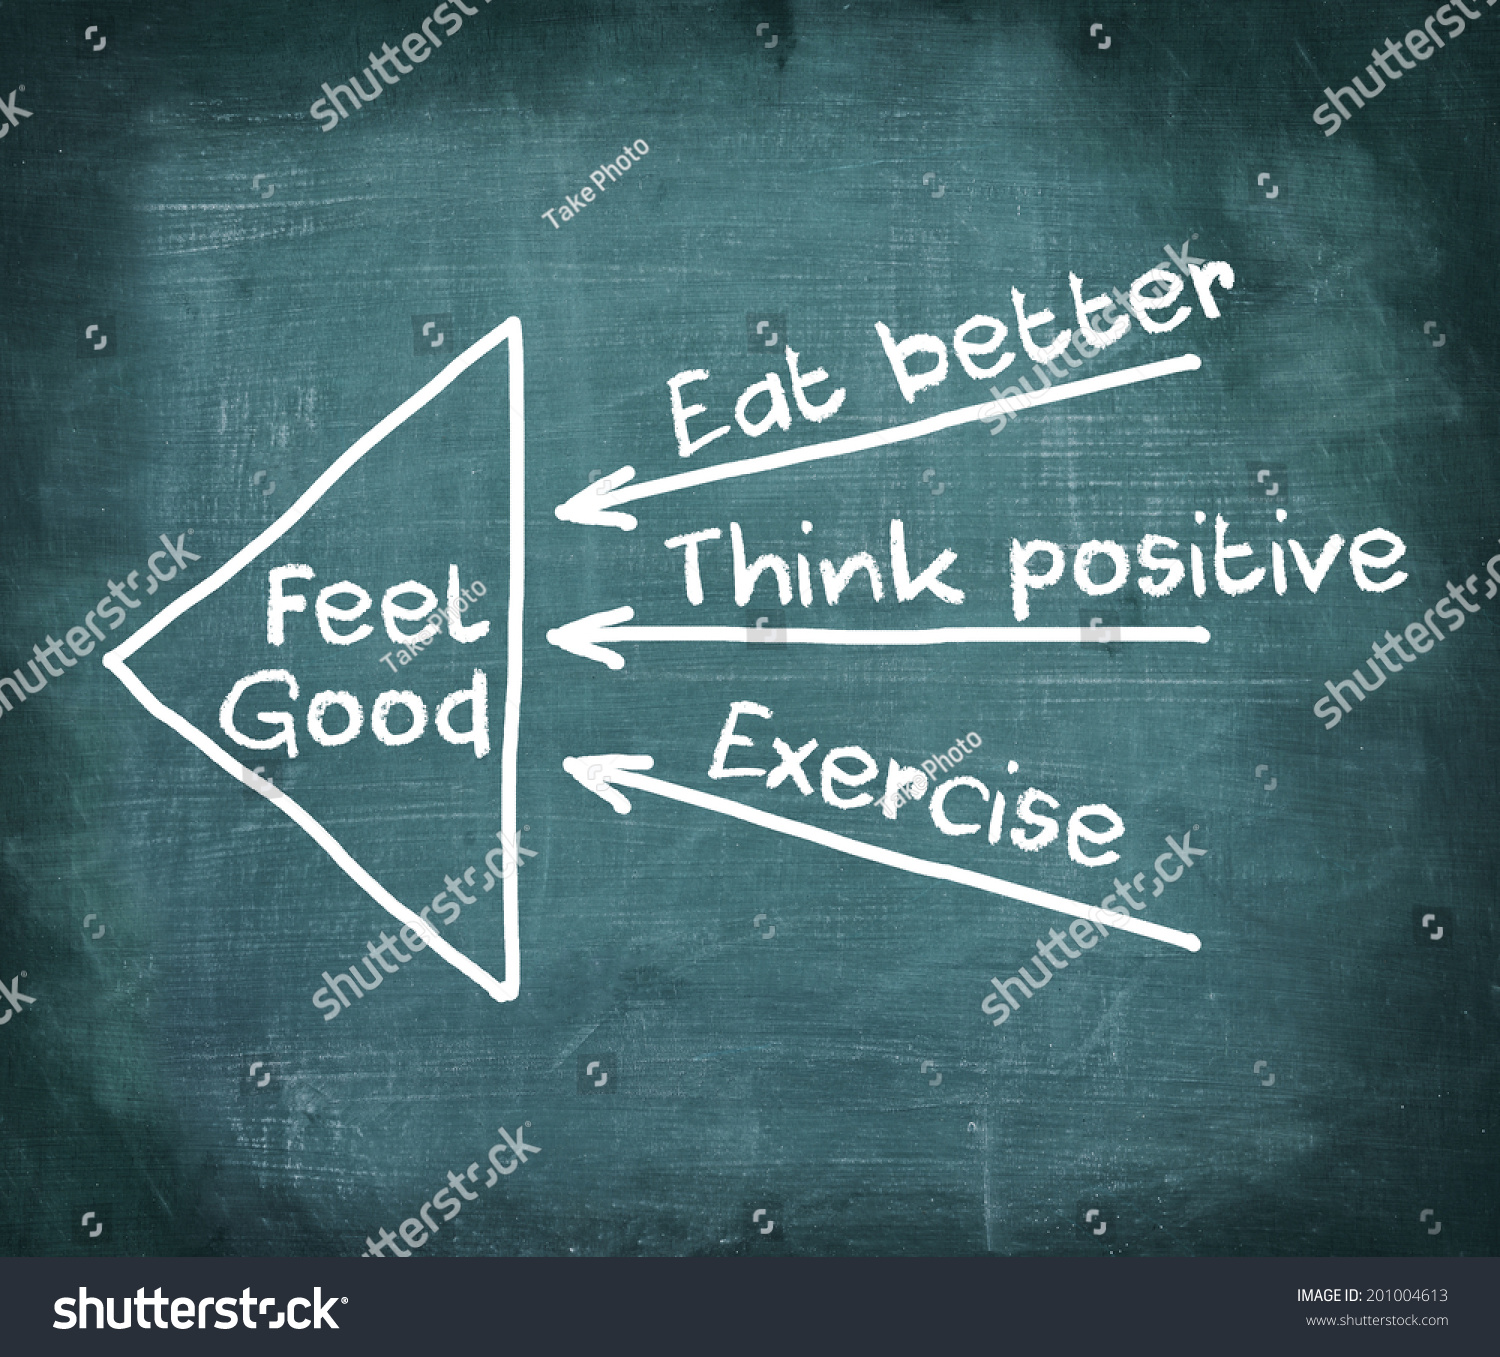 Positive Thinking, Eexercise, Eat Better Concept Of Feeling Good